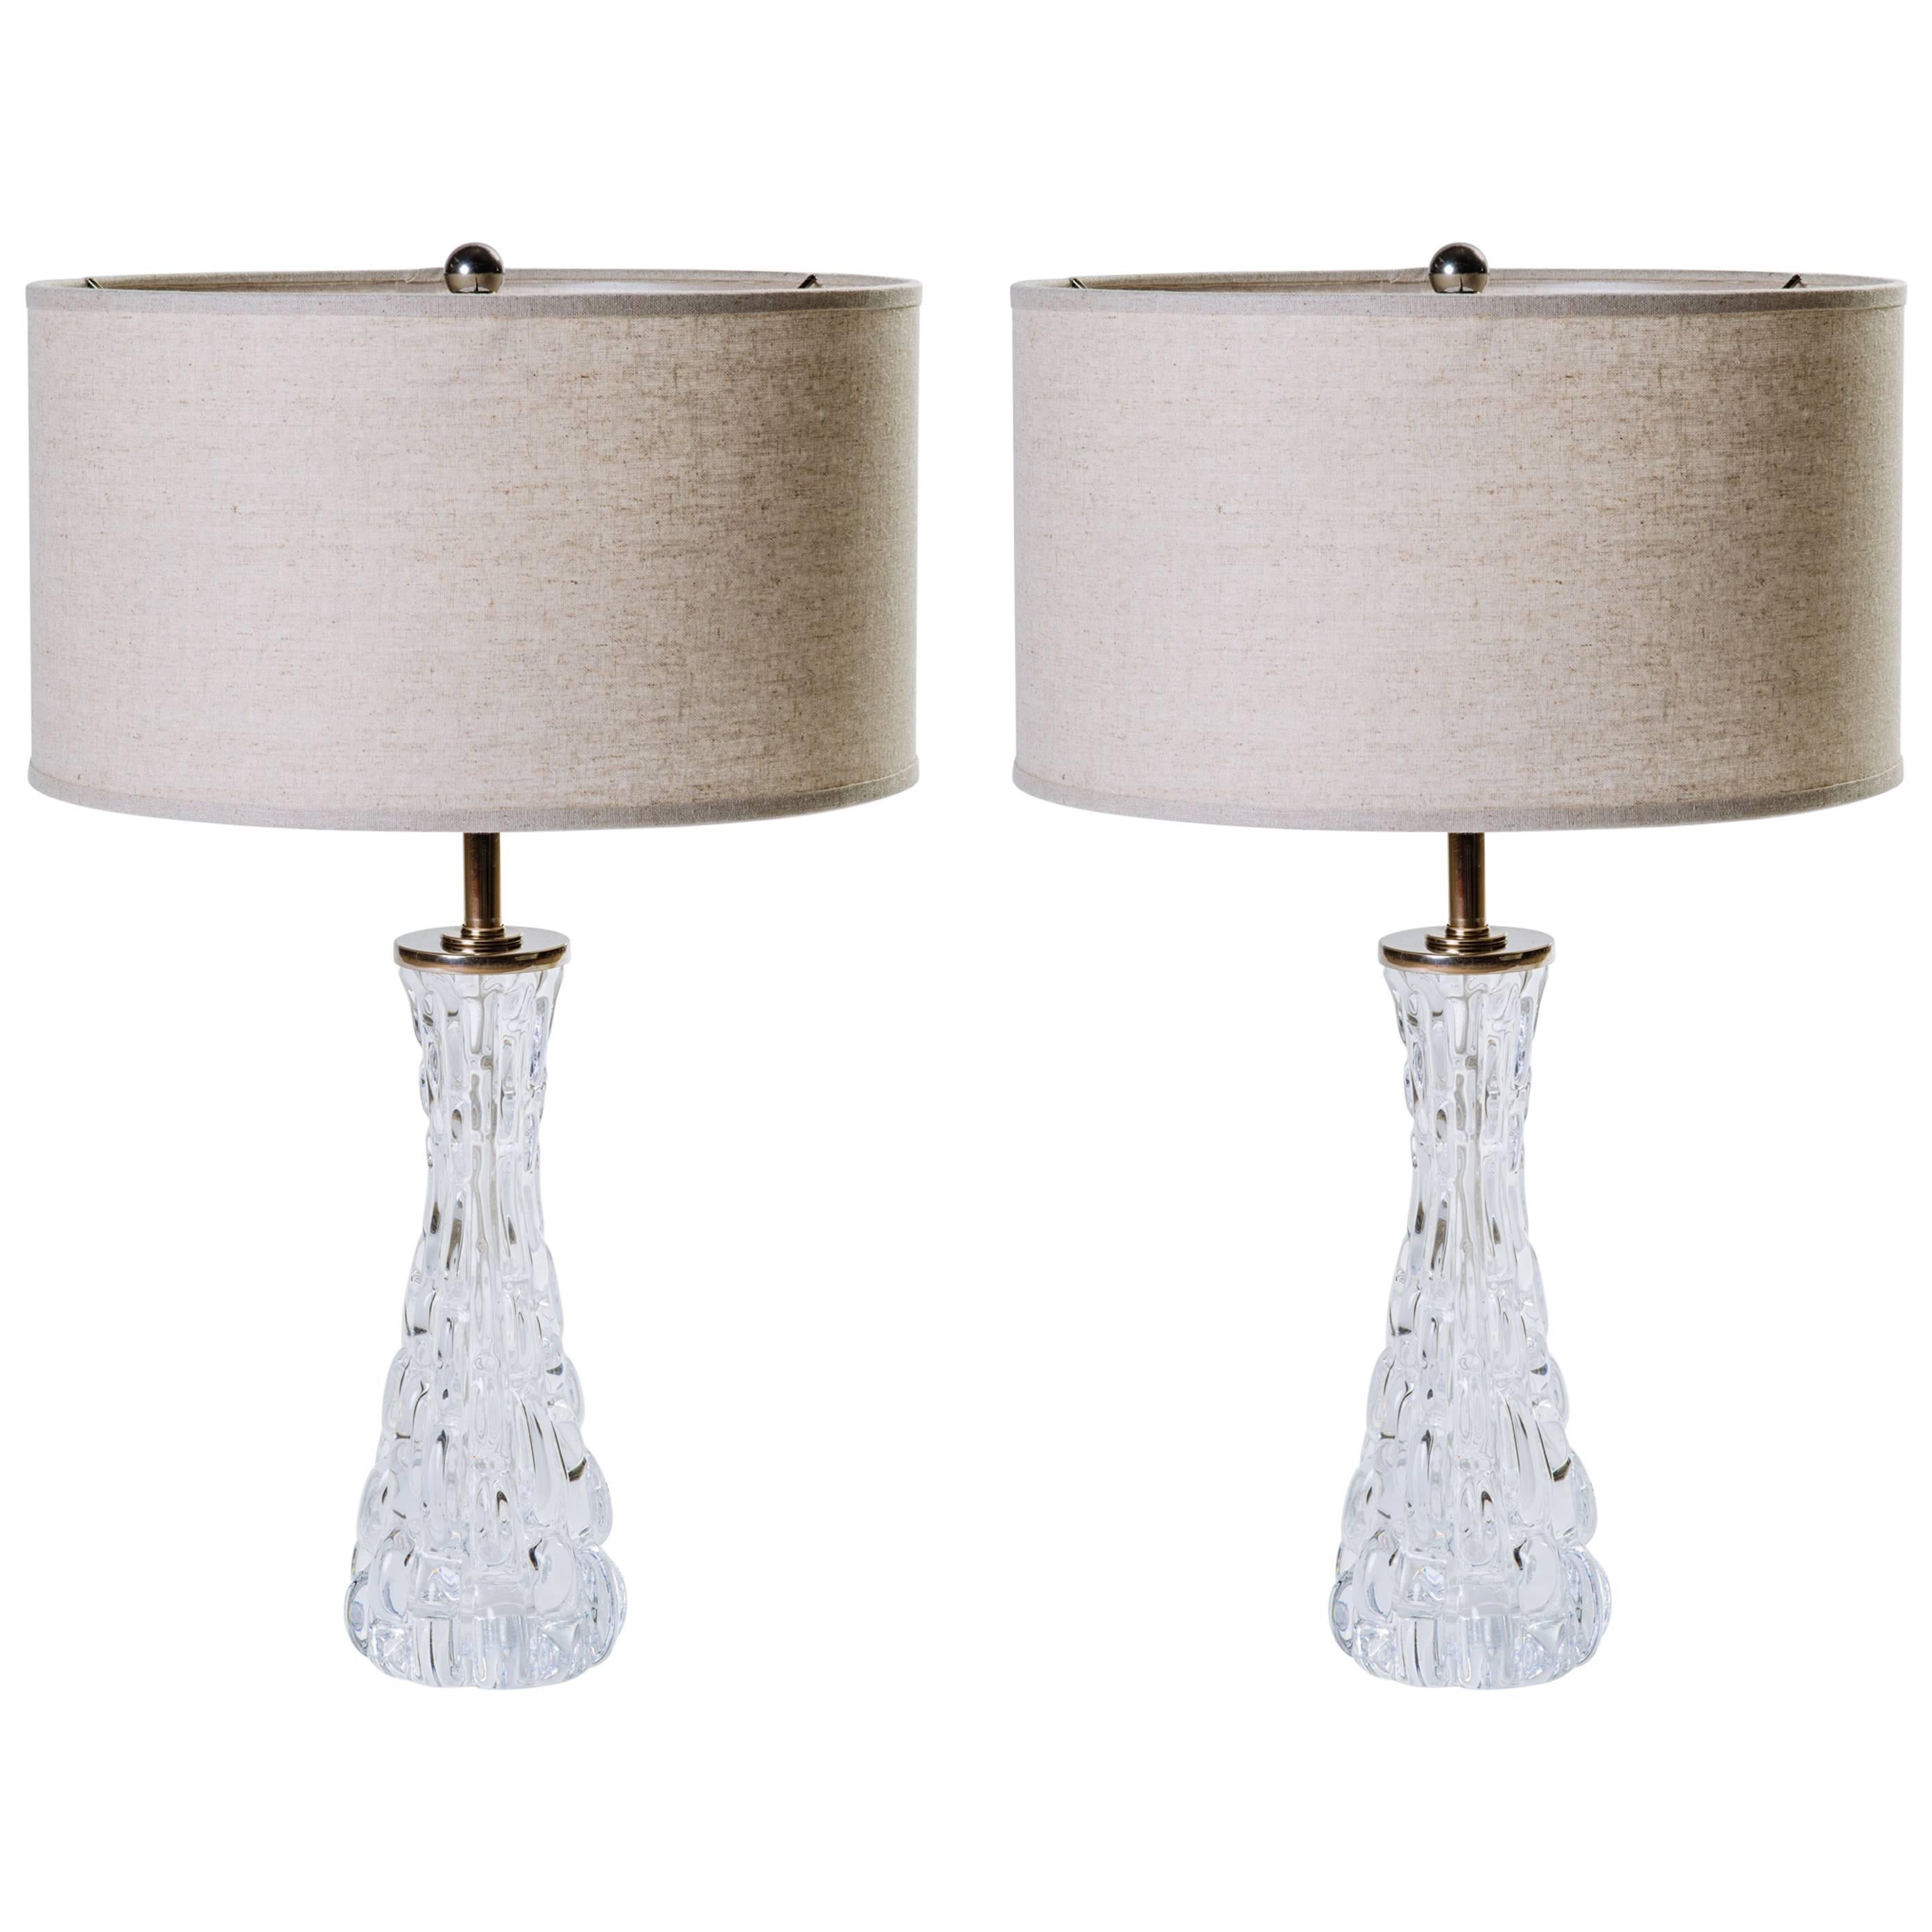 Pair of Swedish Mid-Century Modern Crystal Ice Glass Lamps by Orrefors